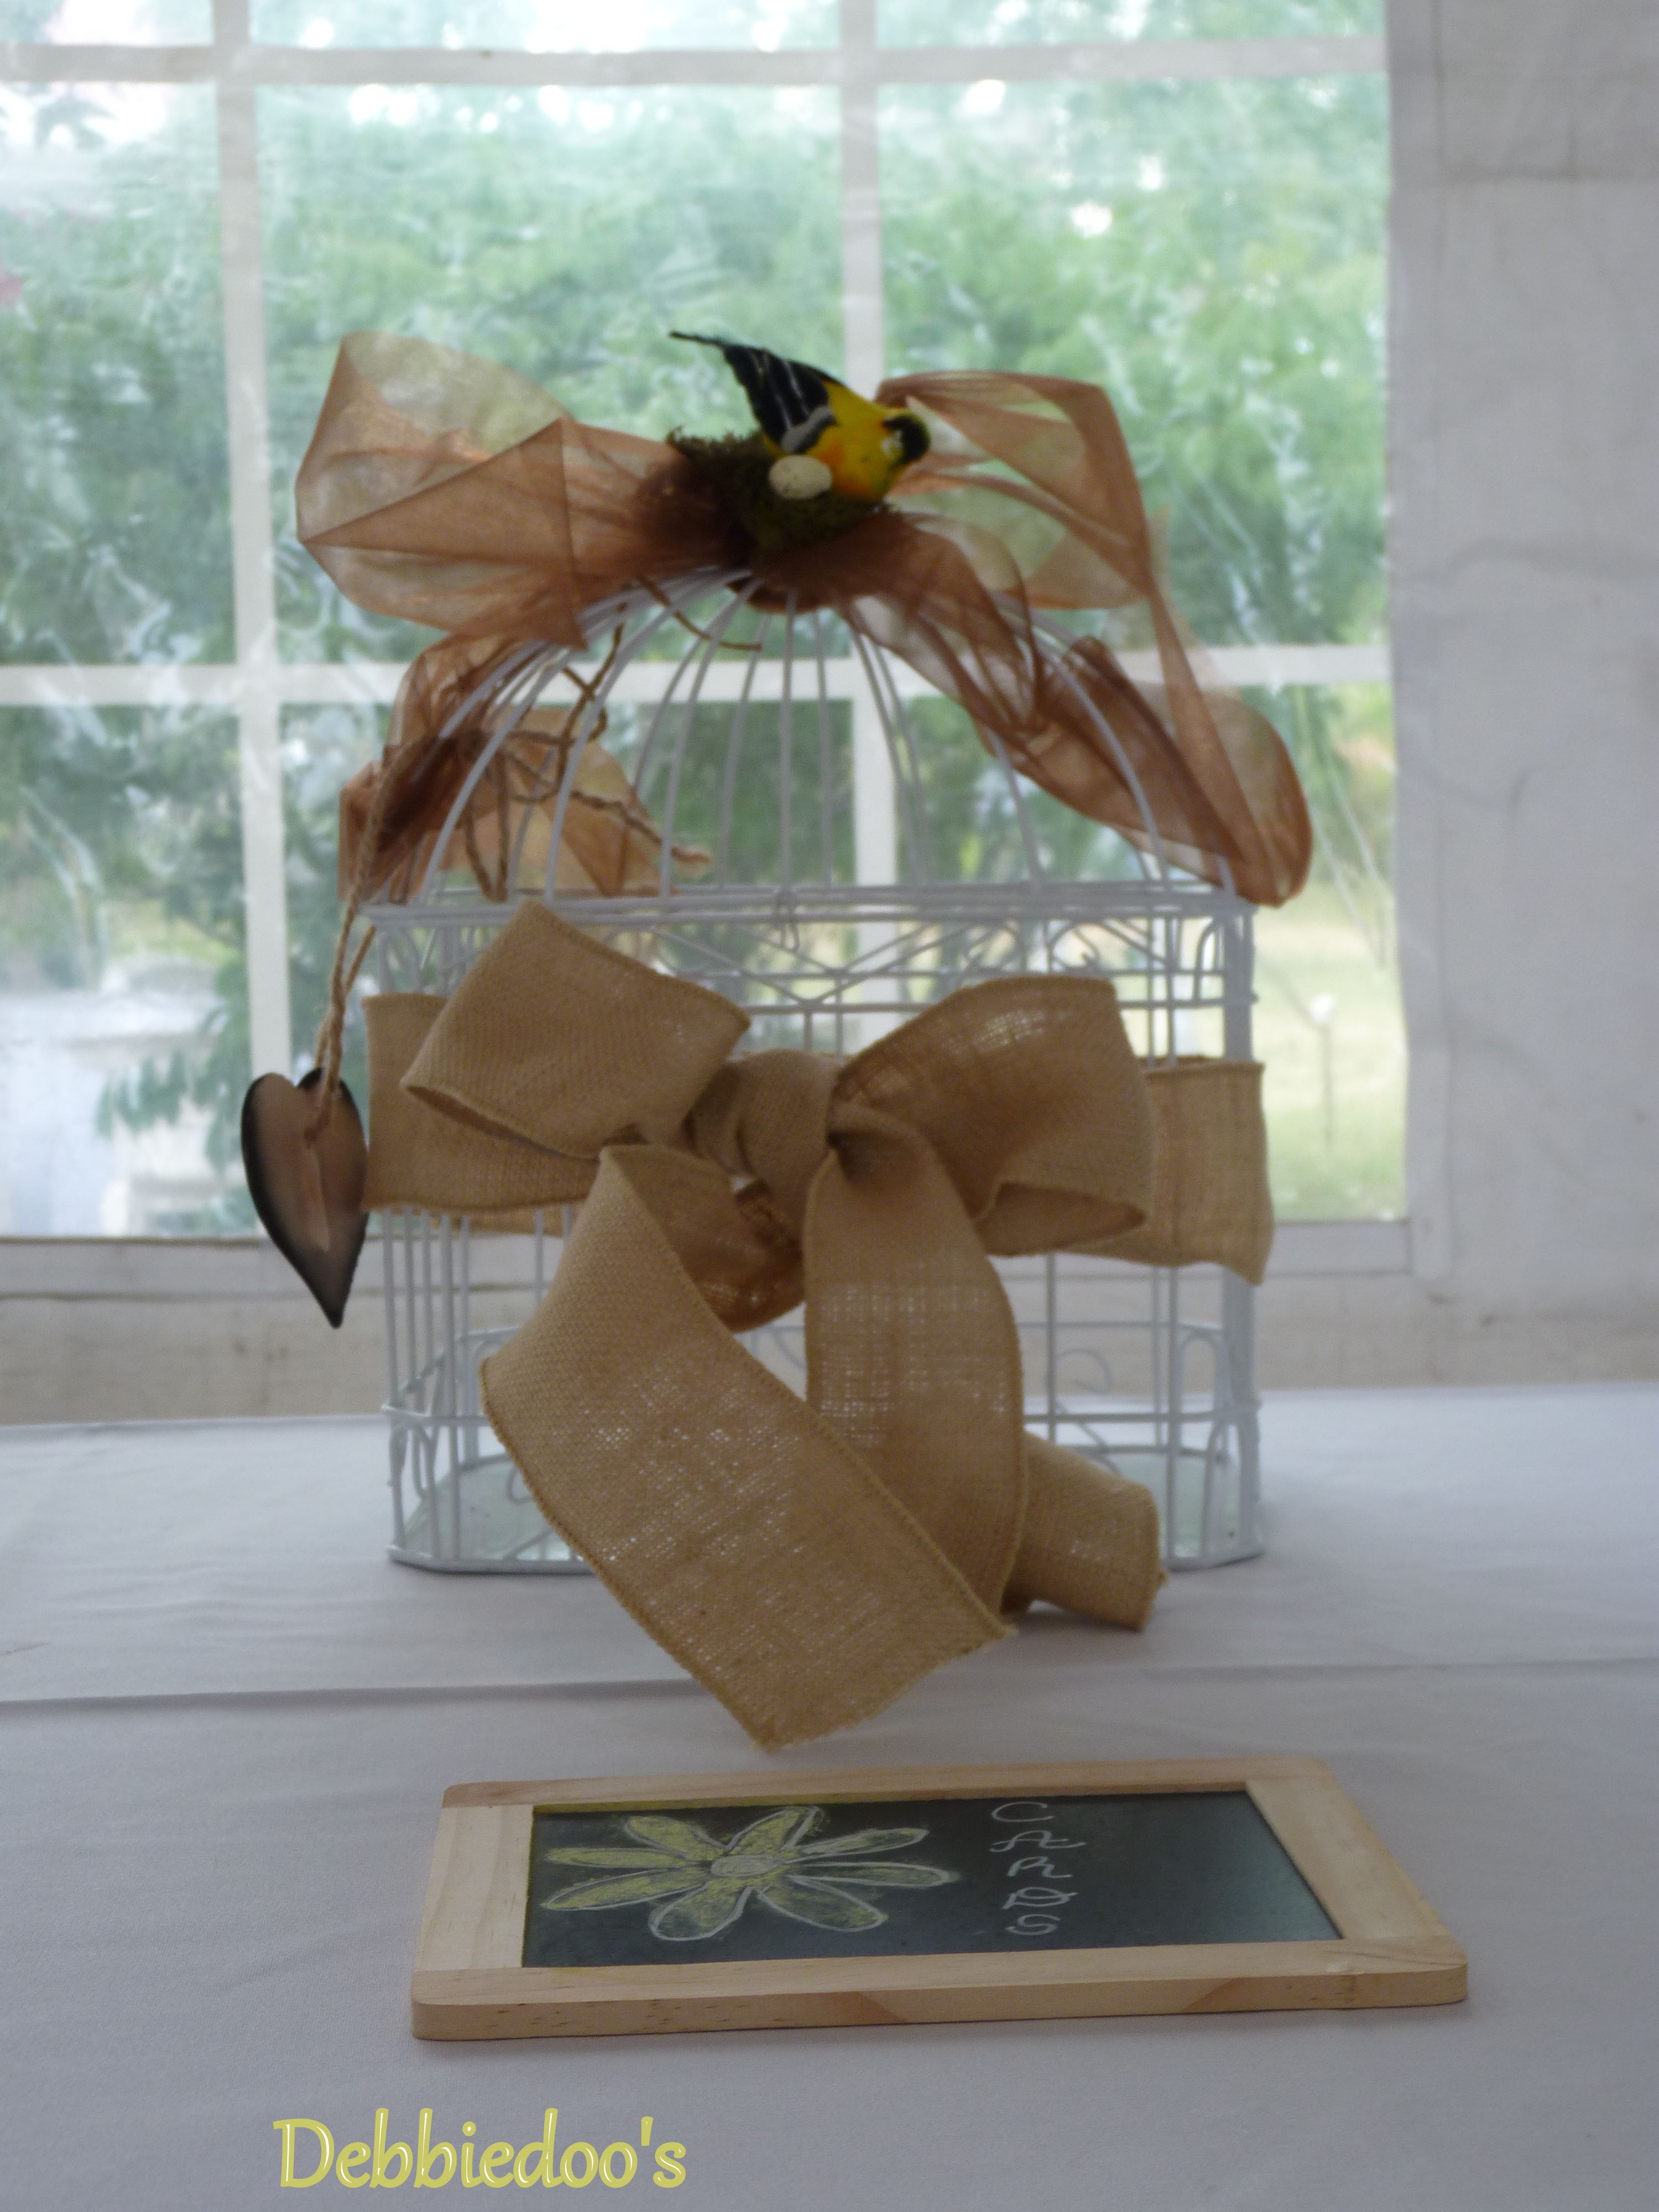 bird cage for wedding cards